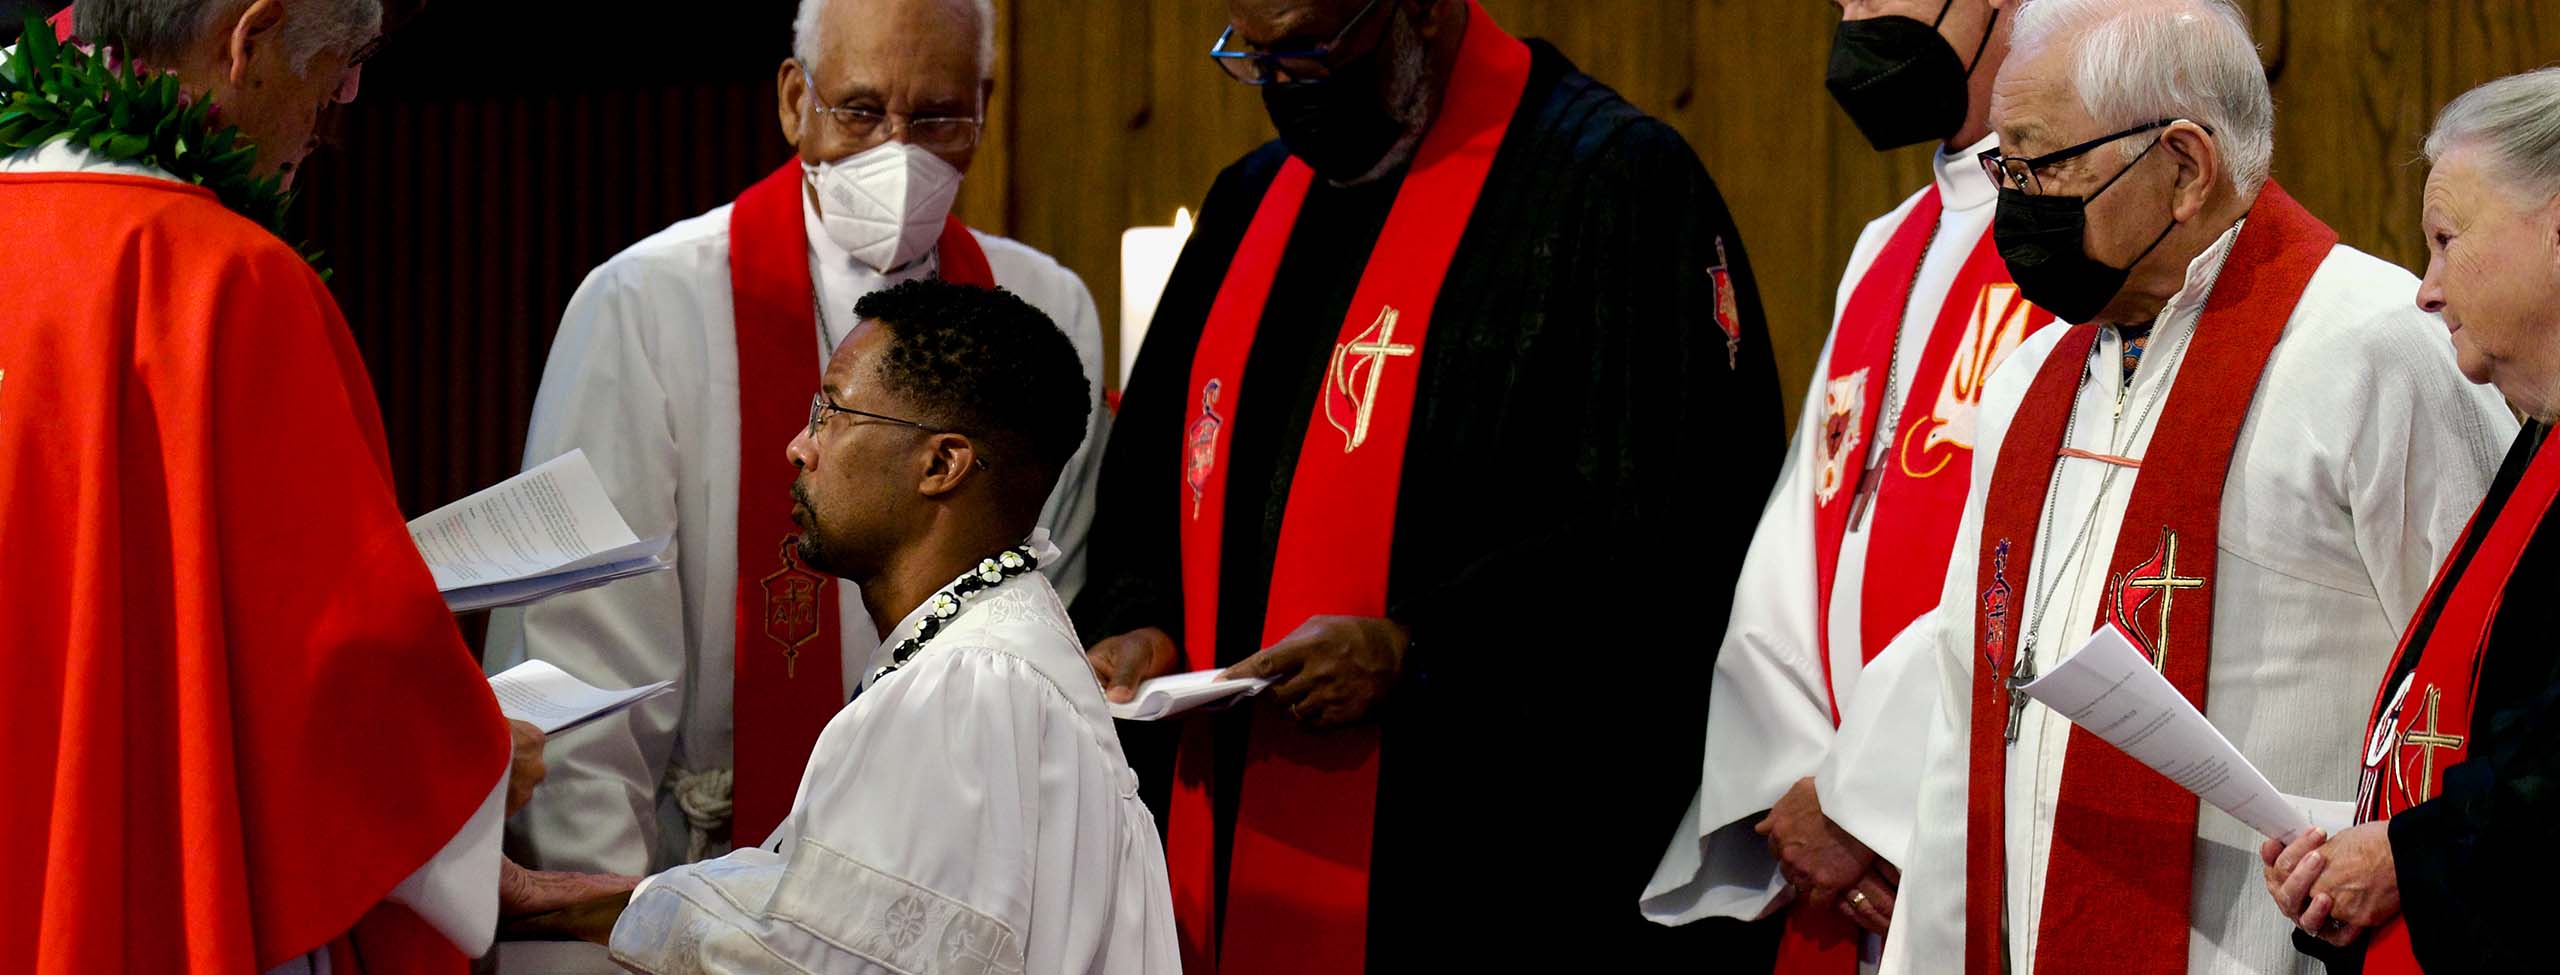 Read more about newly elected Bishop Cedrick Bridgeforth who will begin to serve the GNW Jan. 1, 2023.